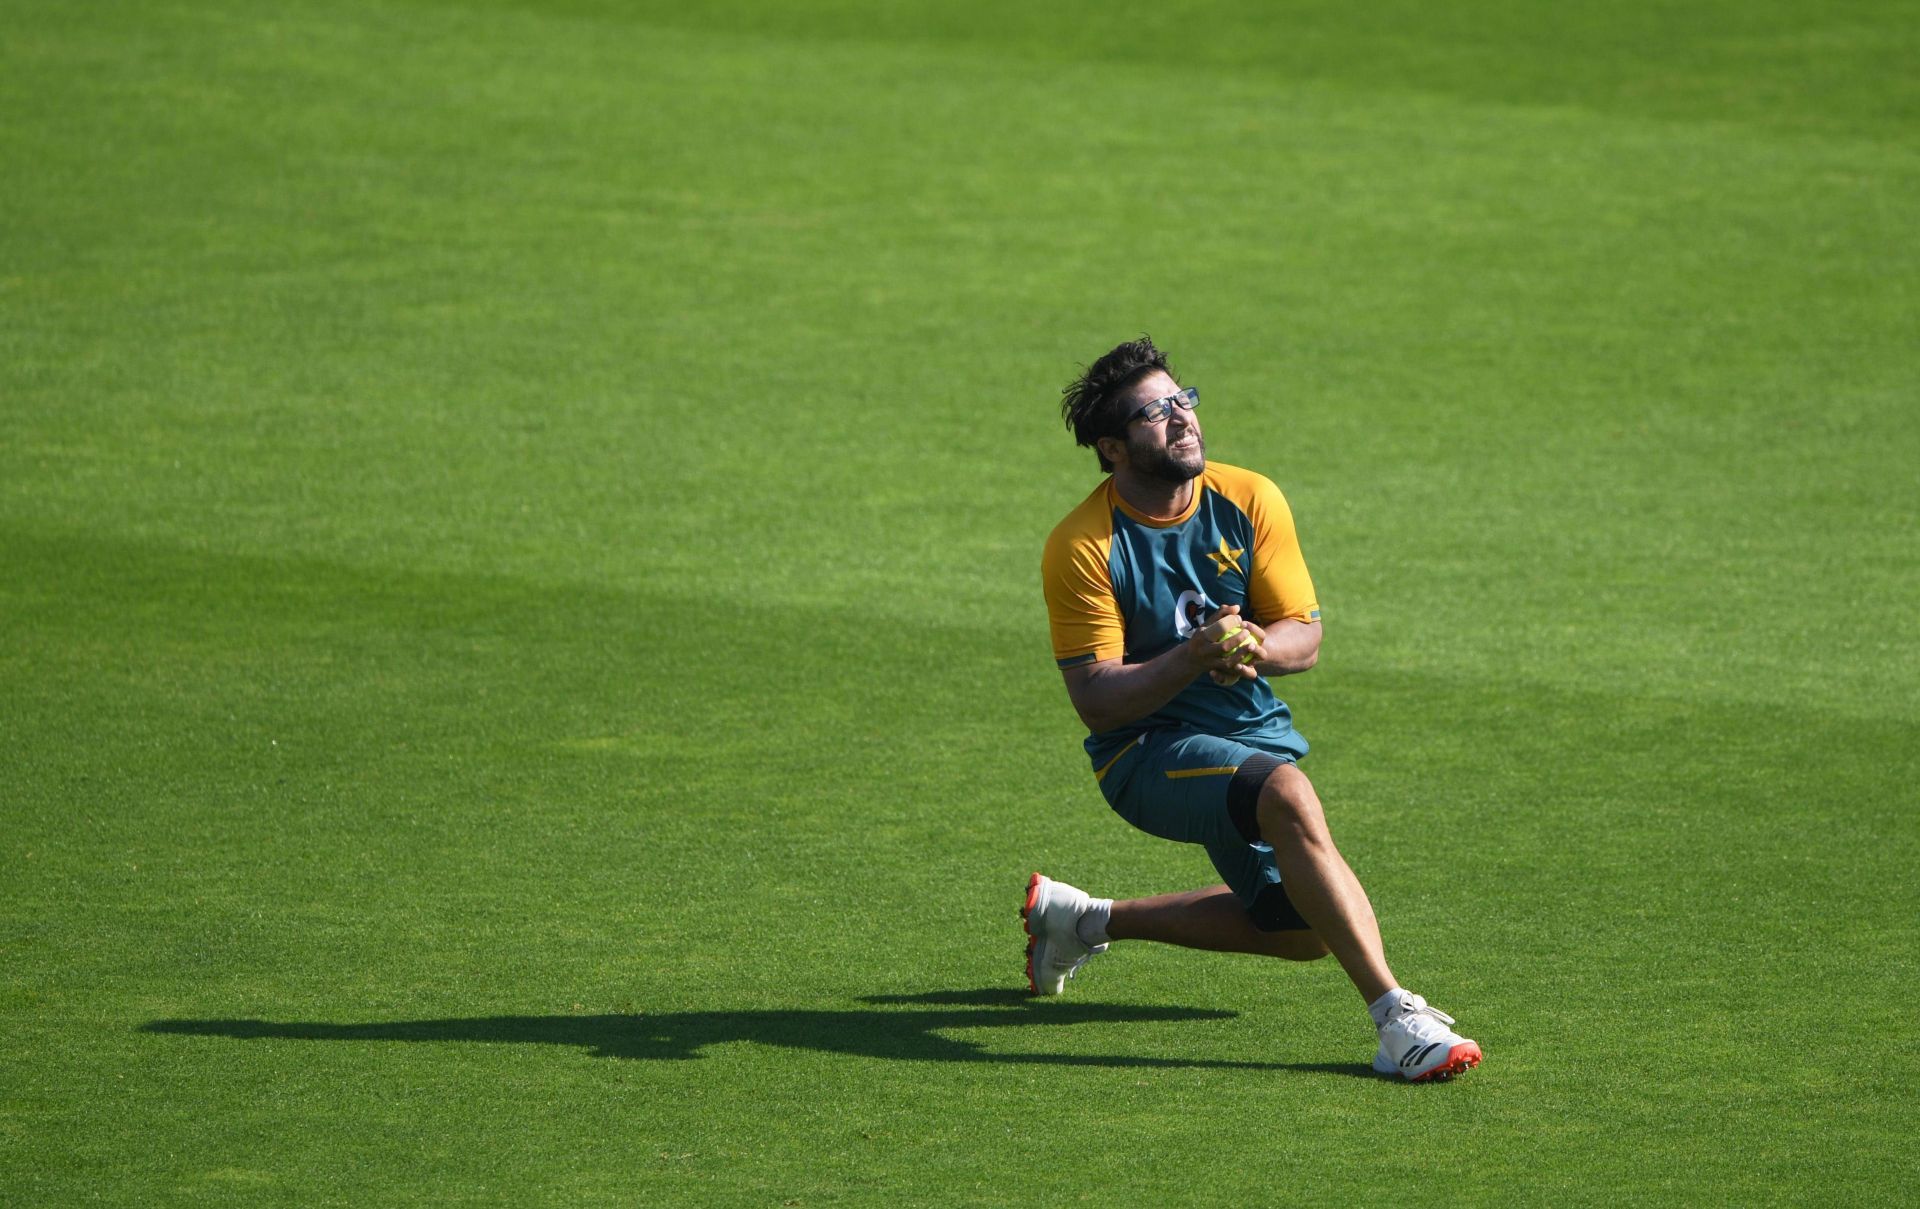 Imam attempts a sliding catch during warm-up.